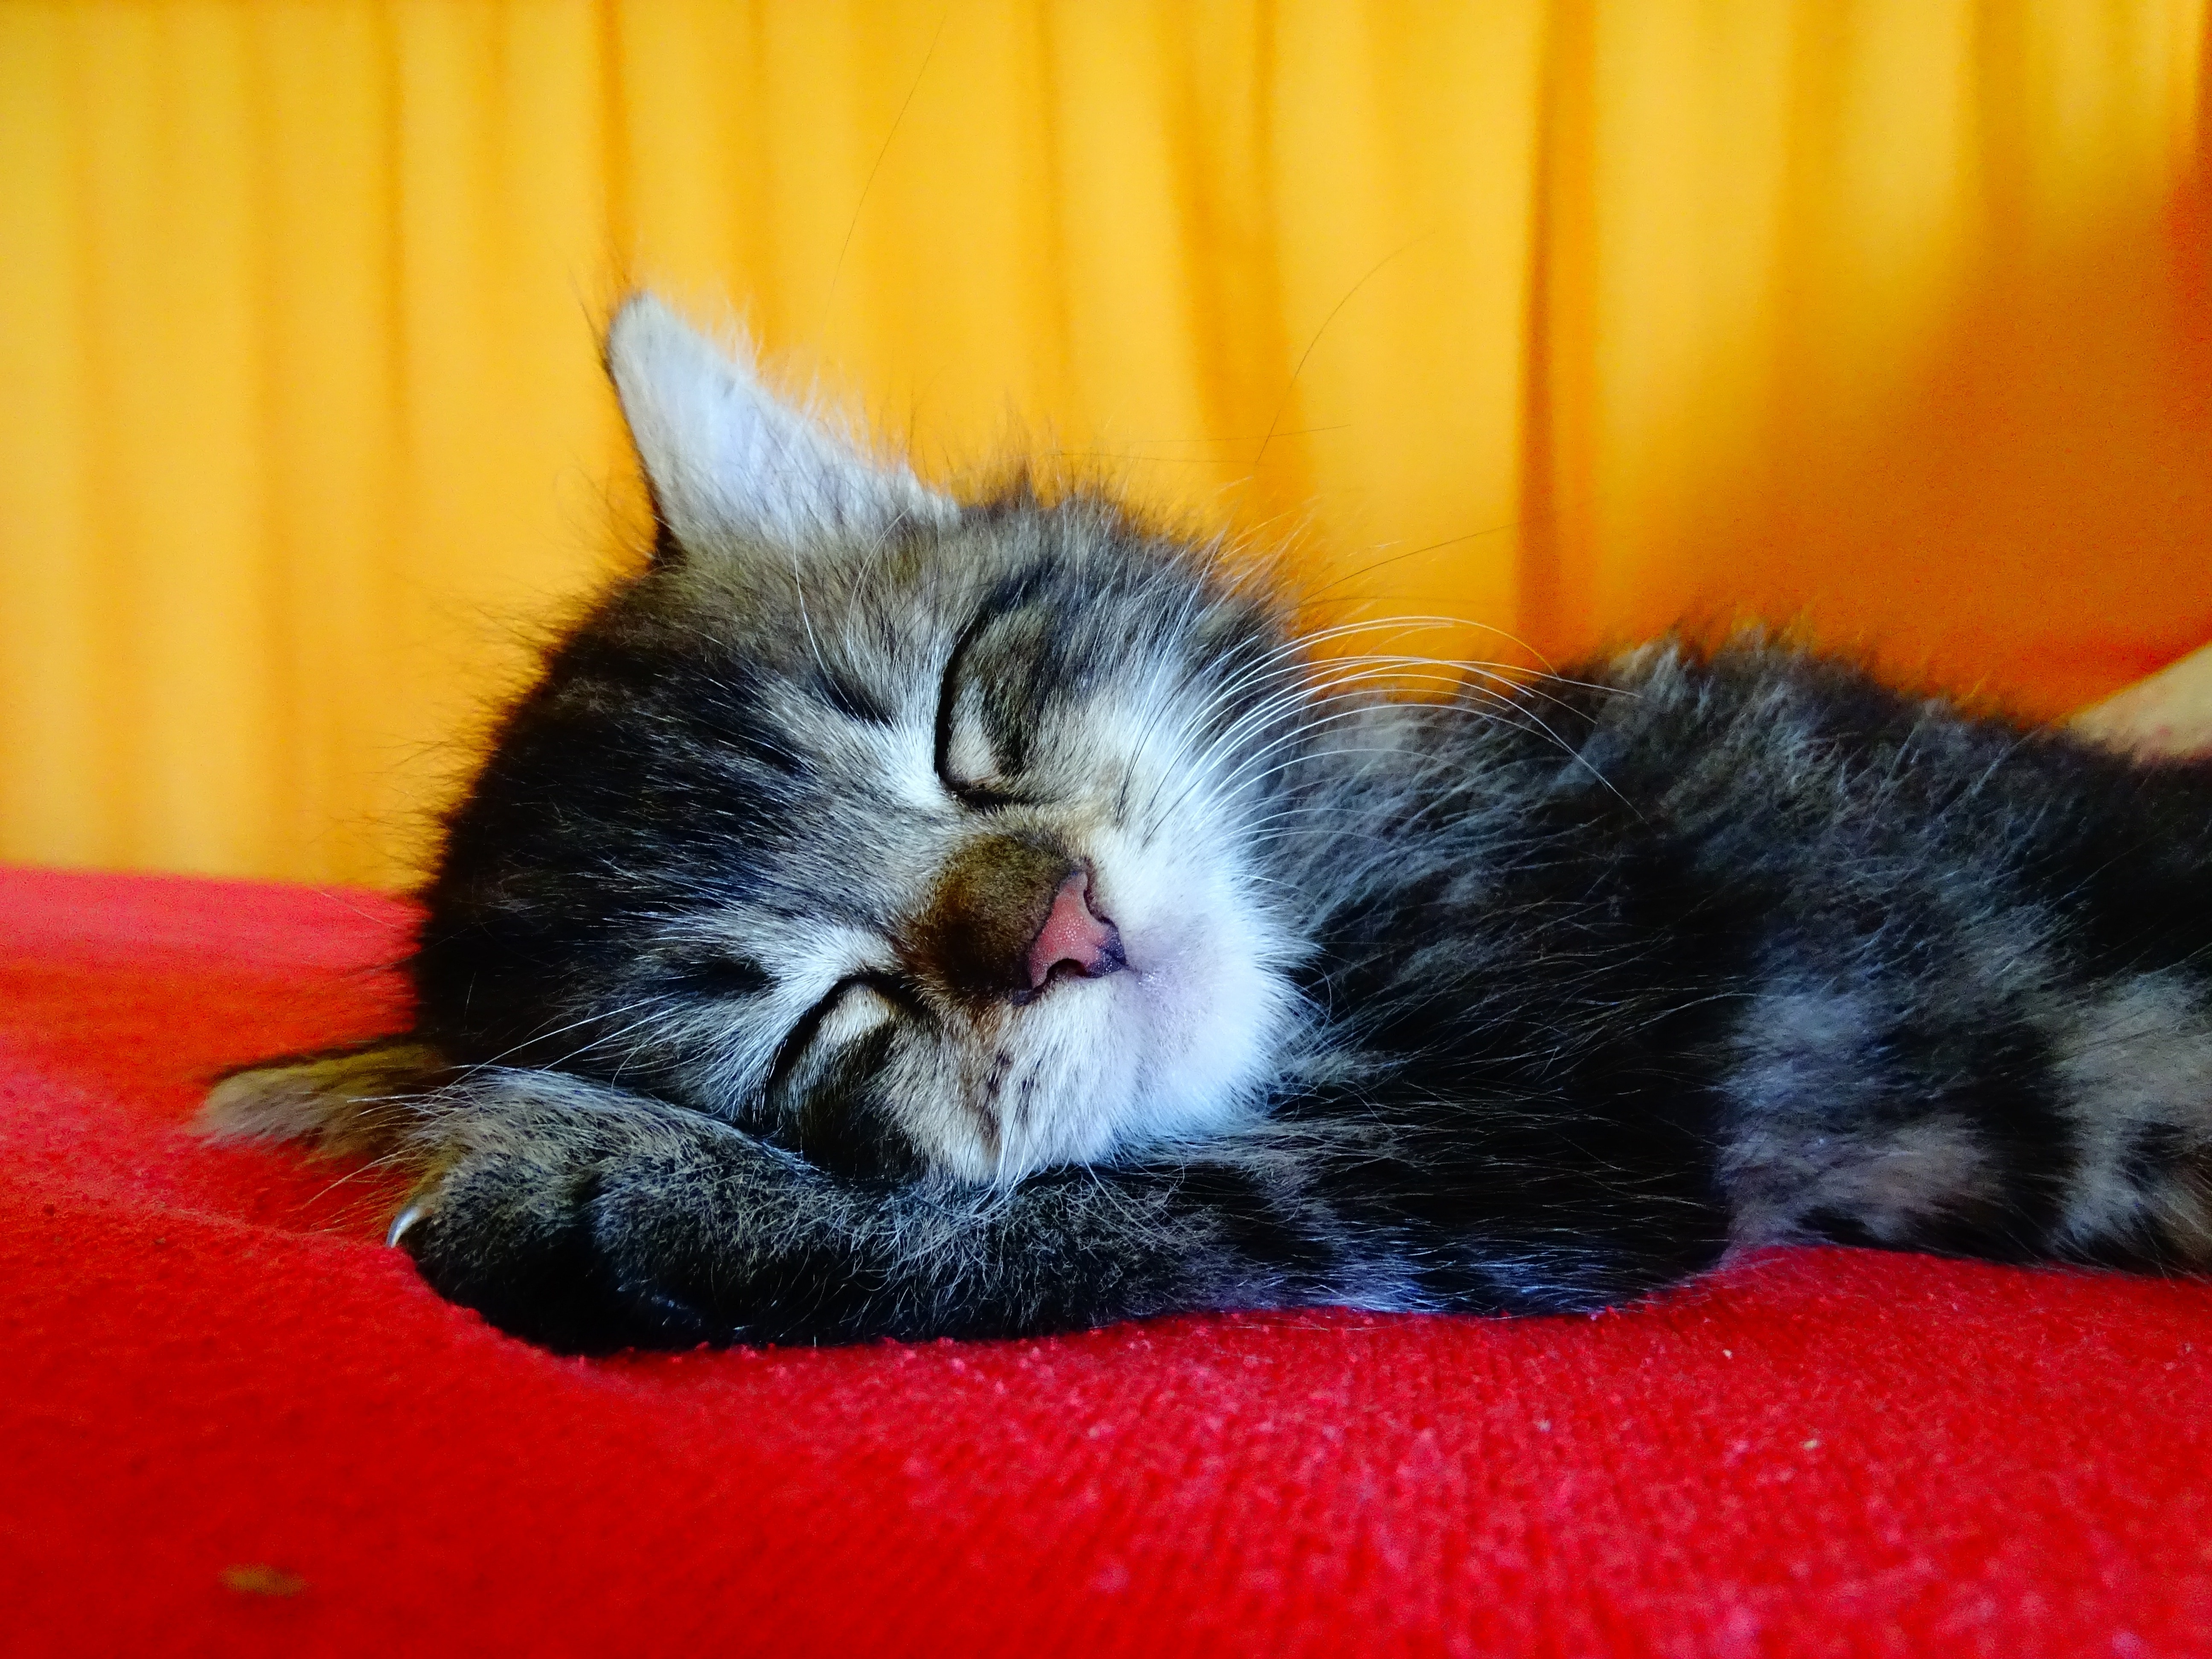 black and white short coated kitten lying on red textile